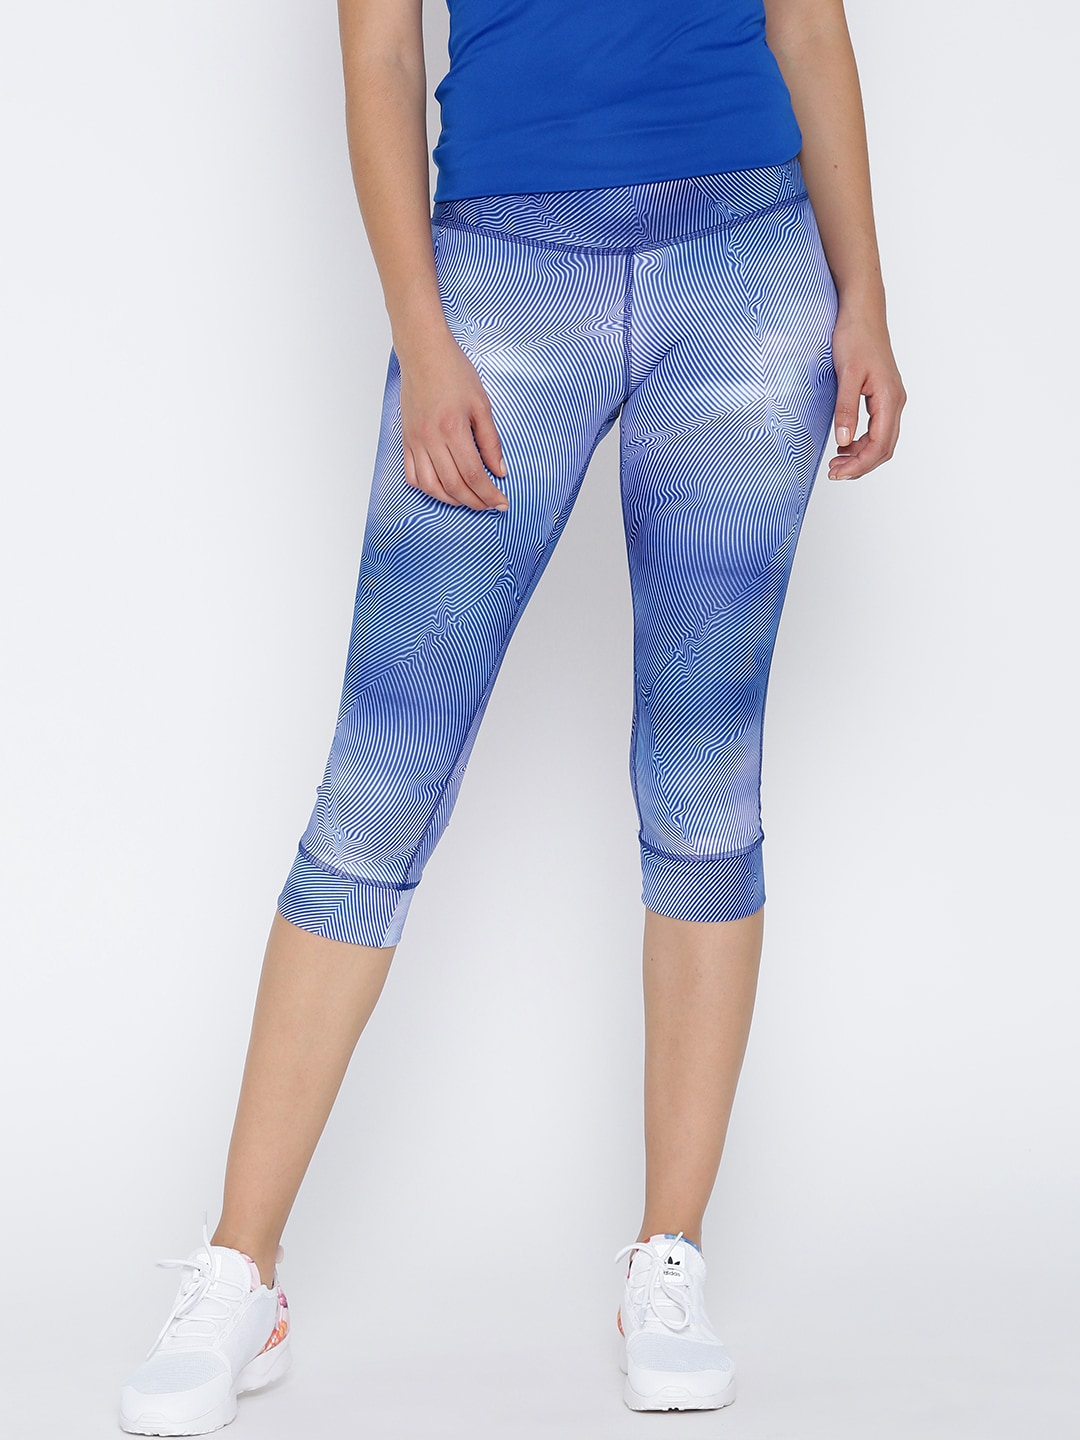 Reebok Blue & White Lux Bold Tech Striped 3/4th Training Tights Price in India